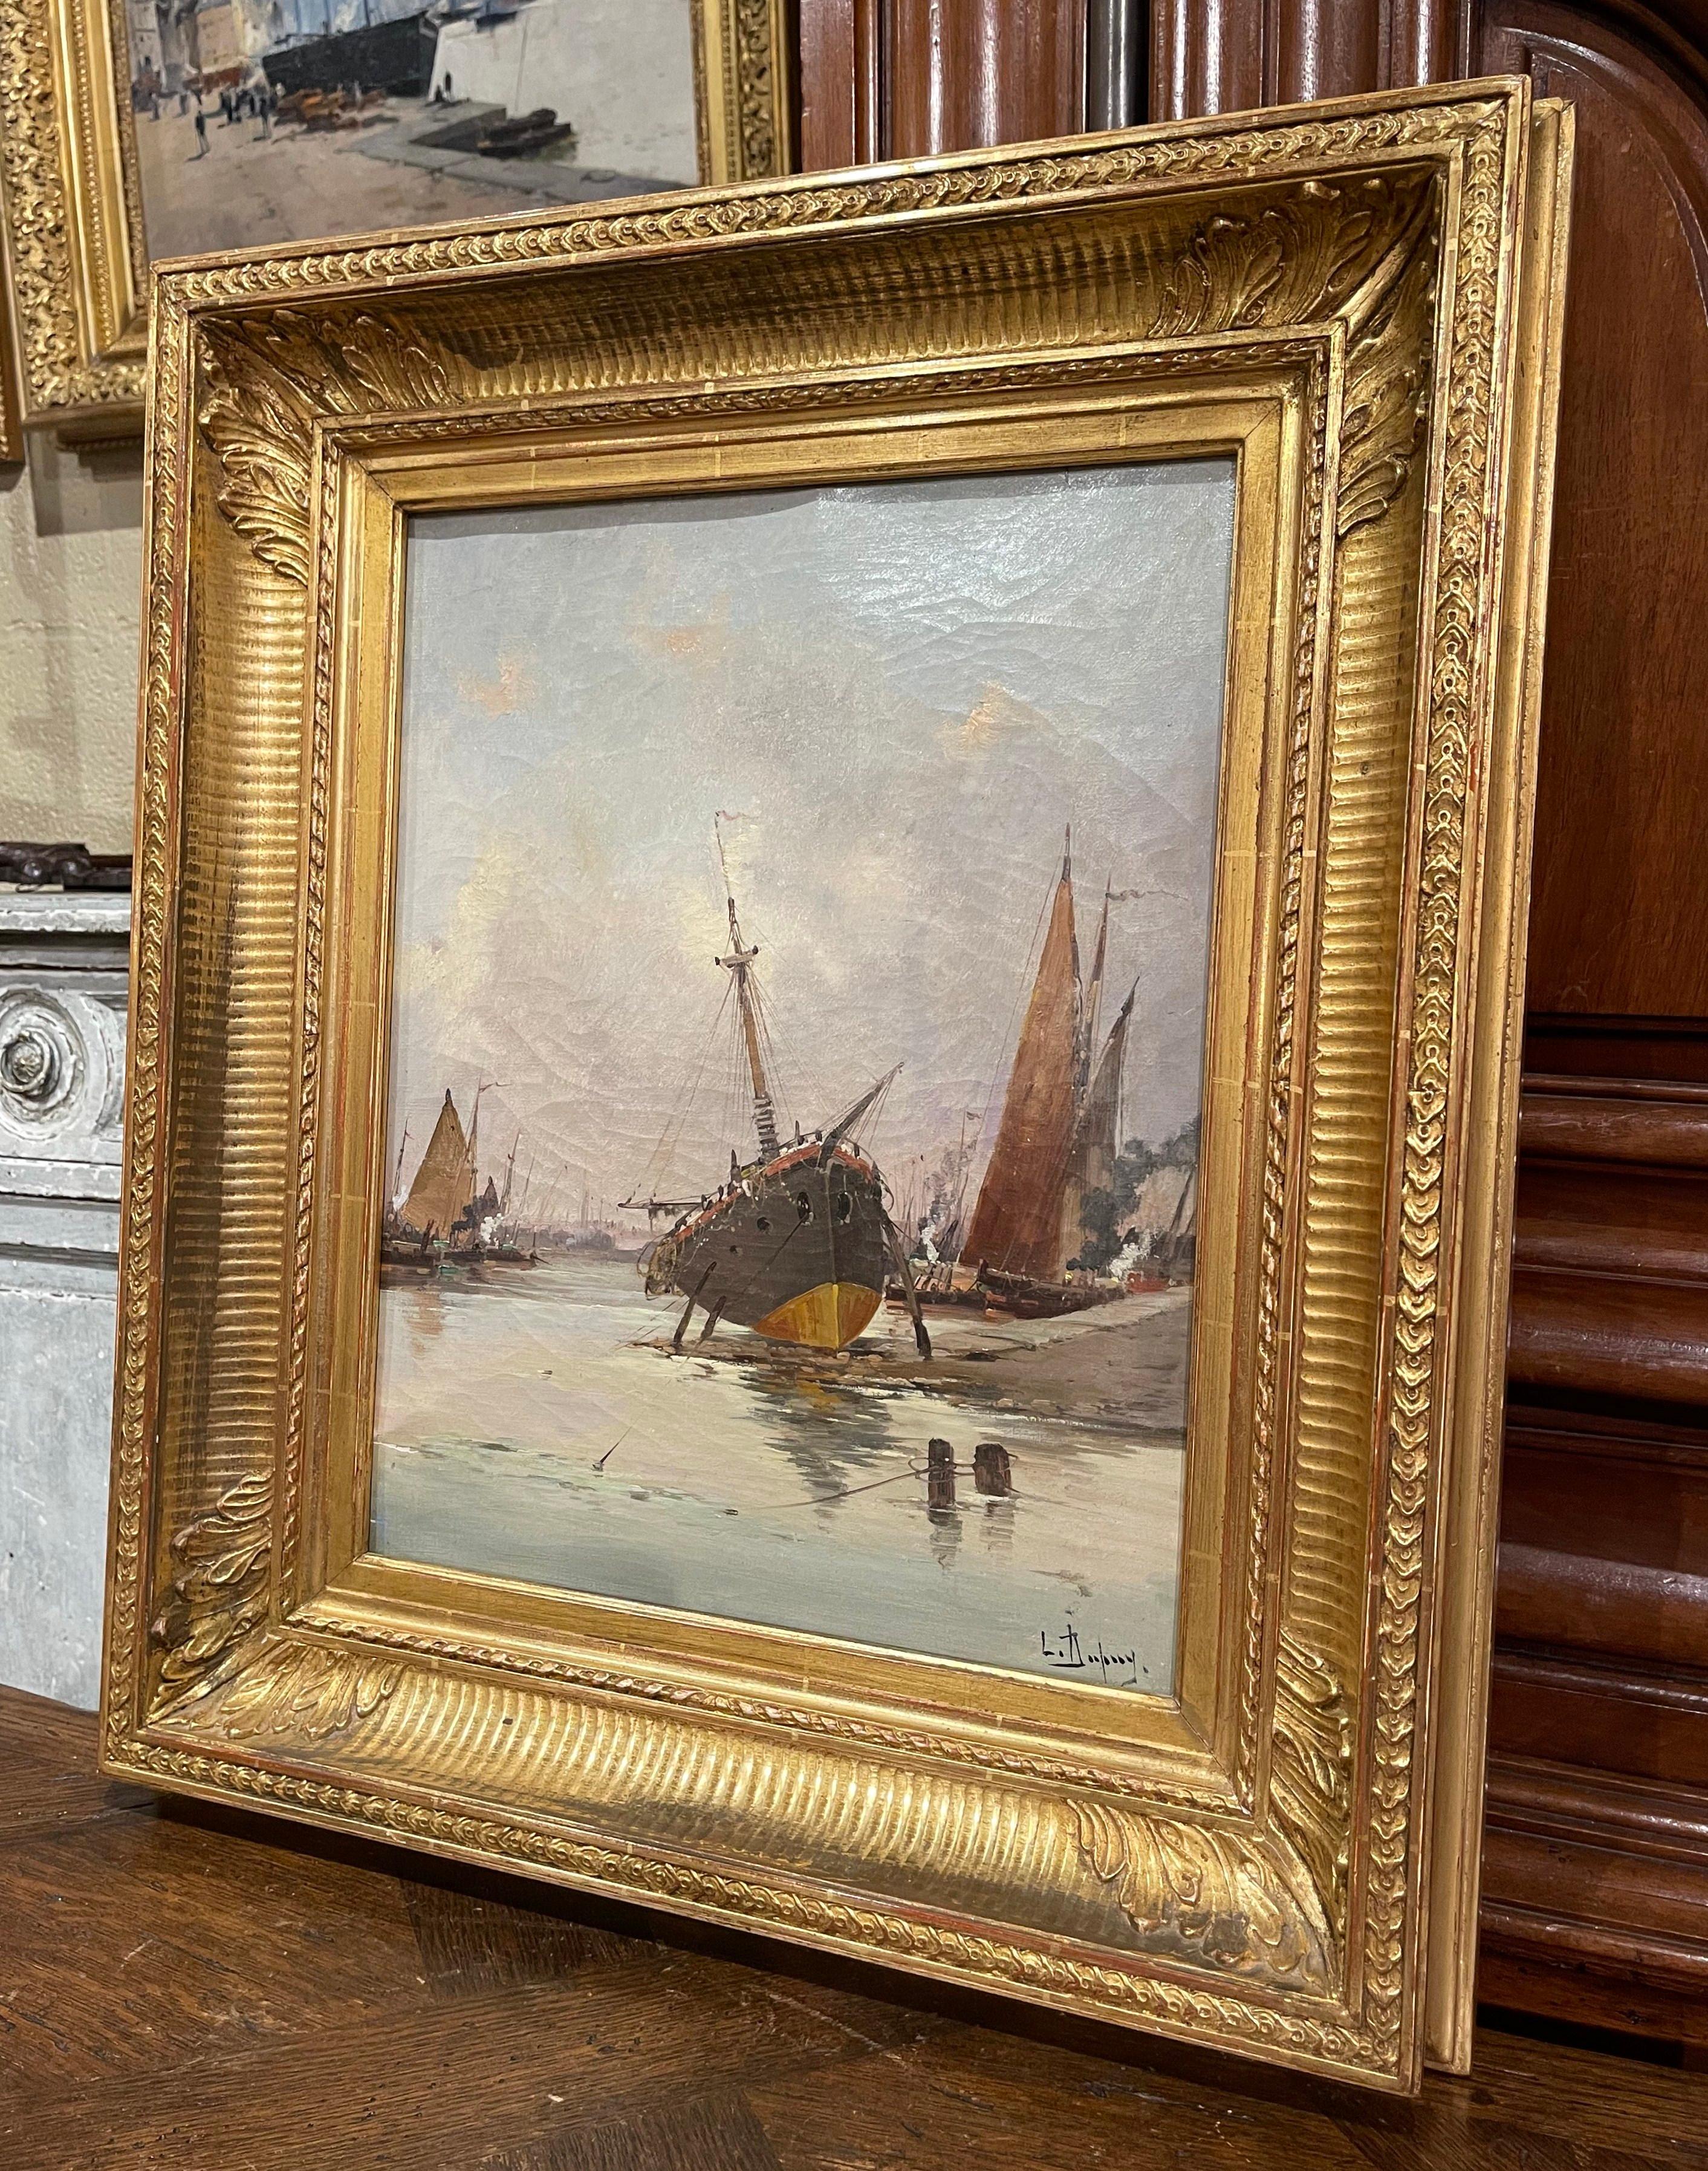 Decorate a study, living room or den with this beautiful and colorful antique oil on canvas painting! Painted in France circa 1890, the artwork is set in the original carved gilt wood frame; it illustrate a picturesque, ocean-front port scene in